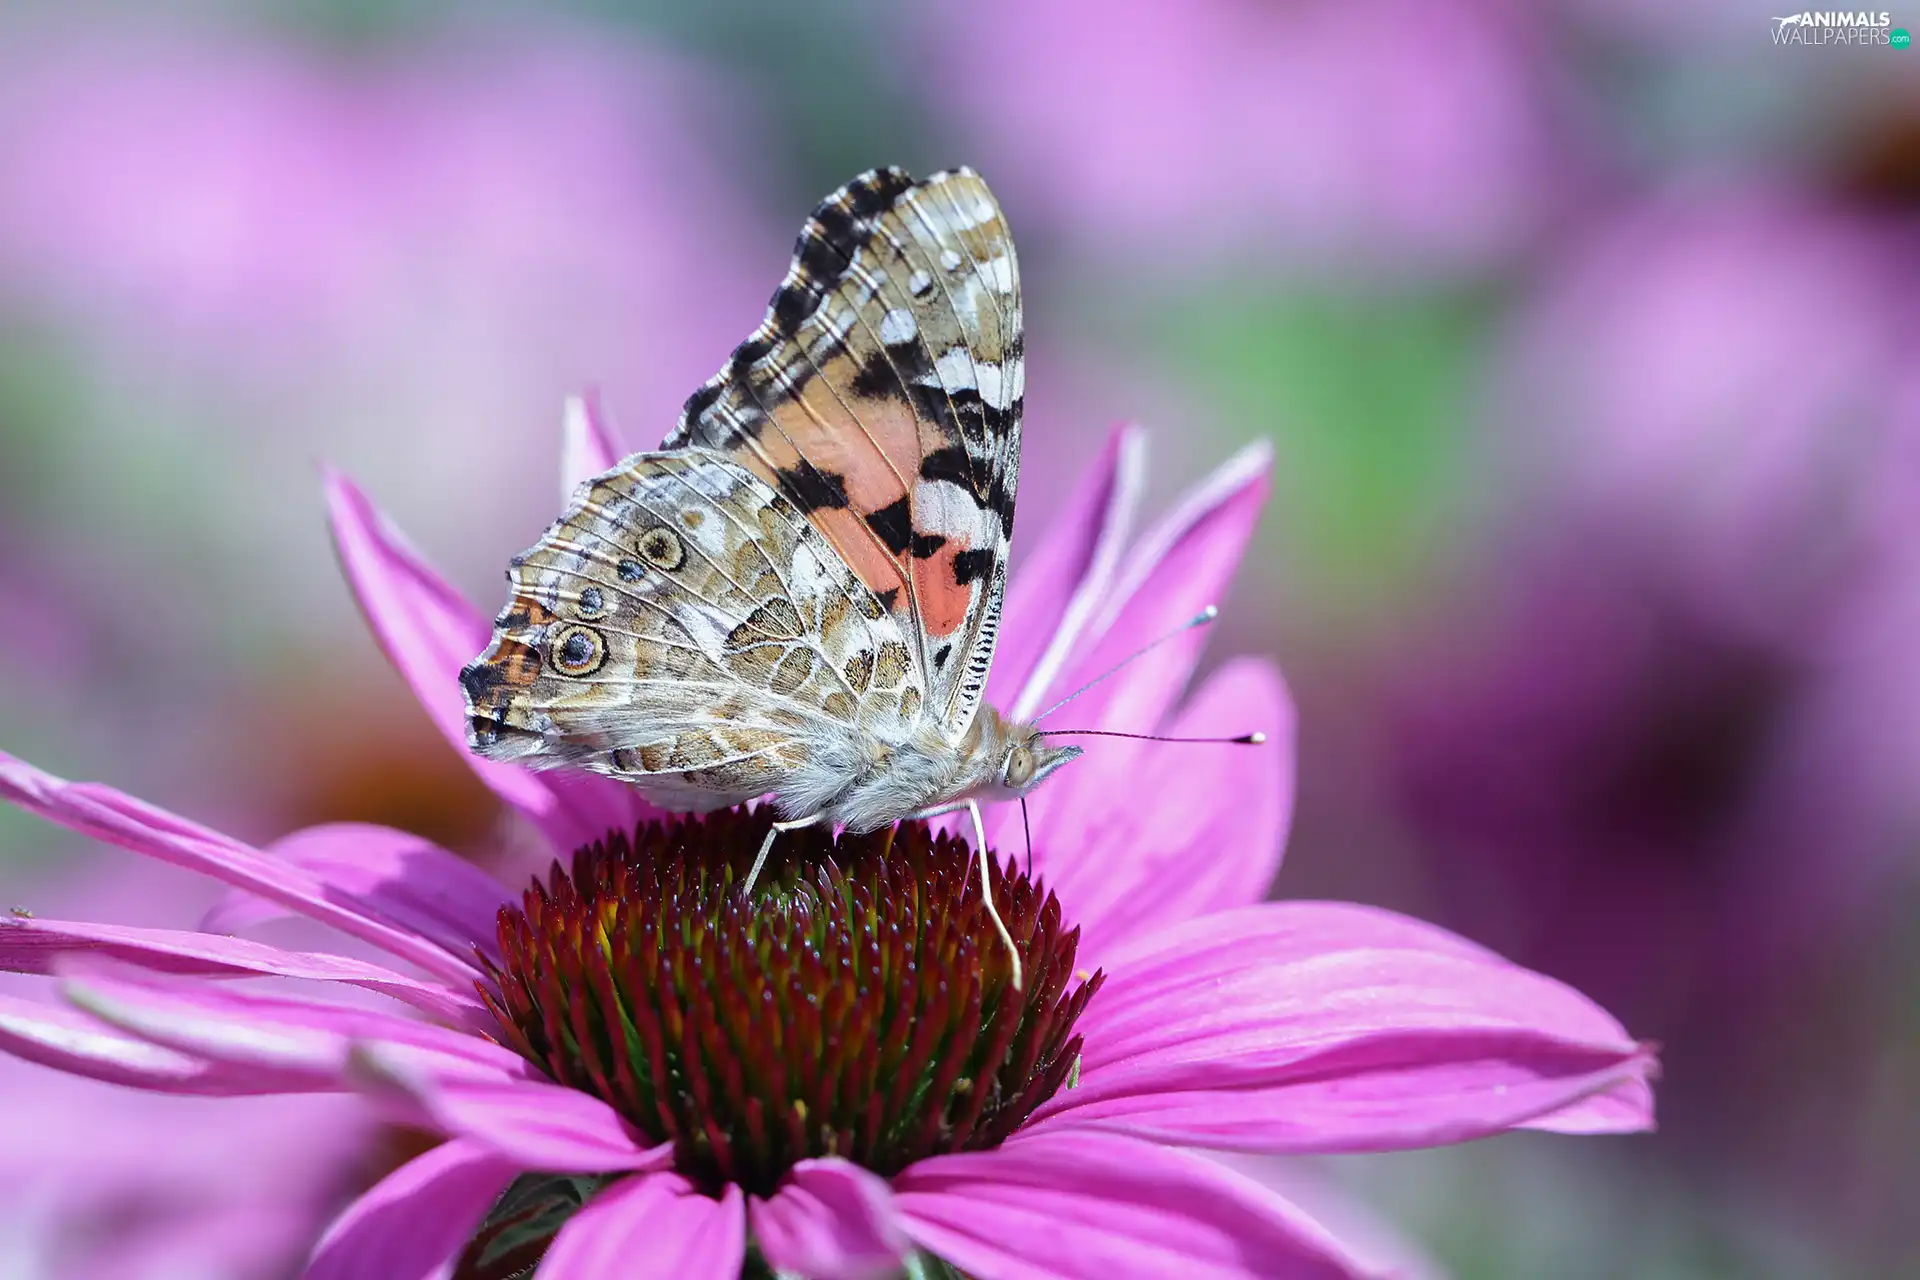 Painted Lady, Colourfull Flowers, echinacea, butterfly